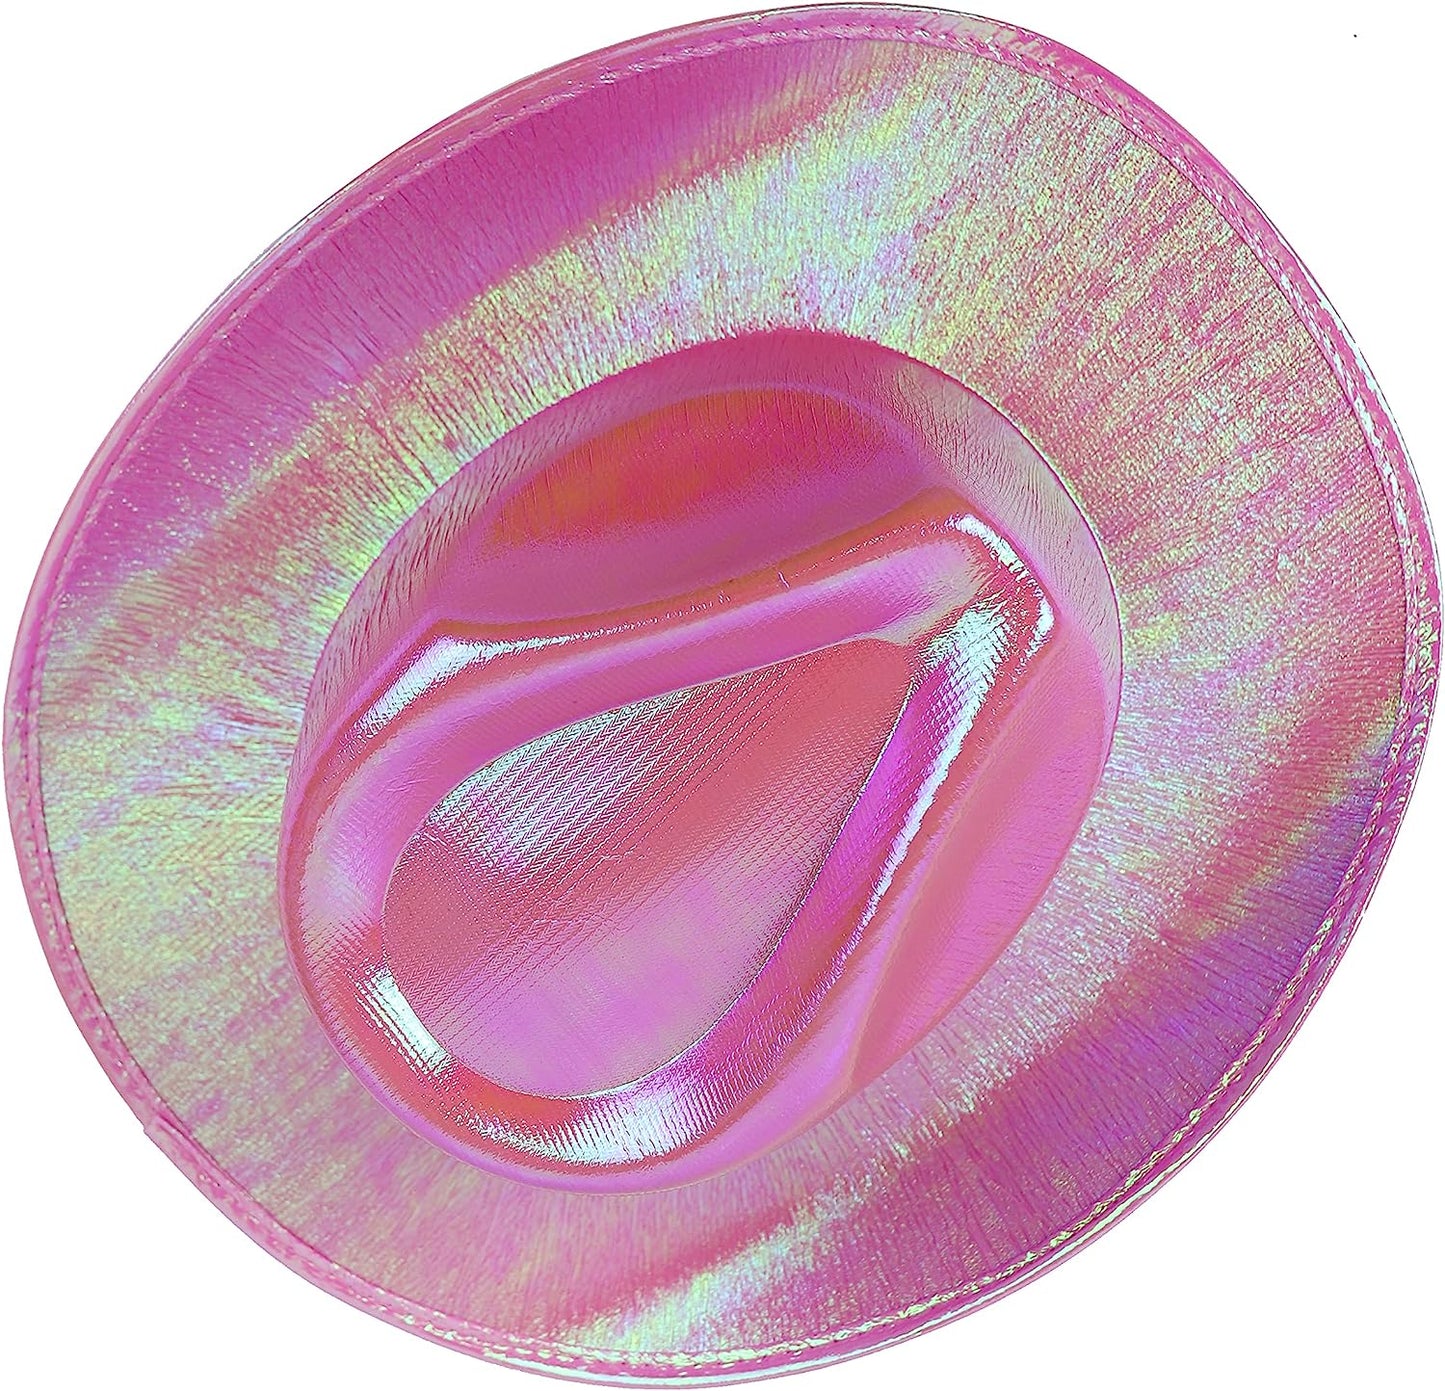 GIFTEXPRESS Pink Space Holographic Cowgirl Hat